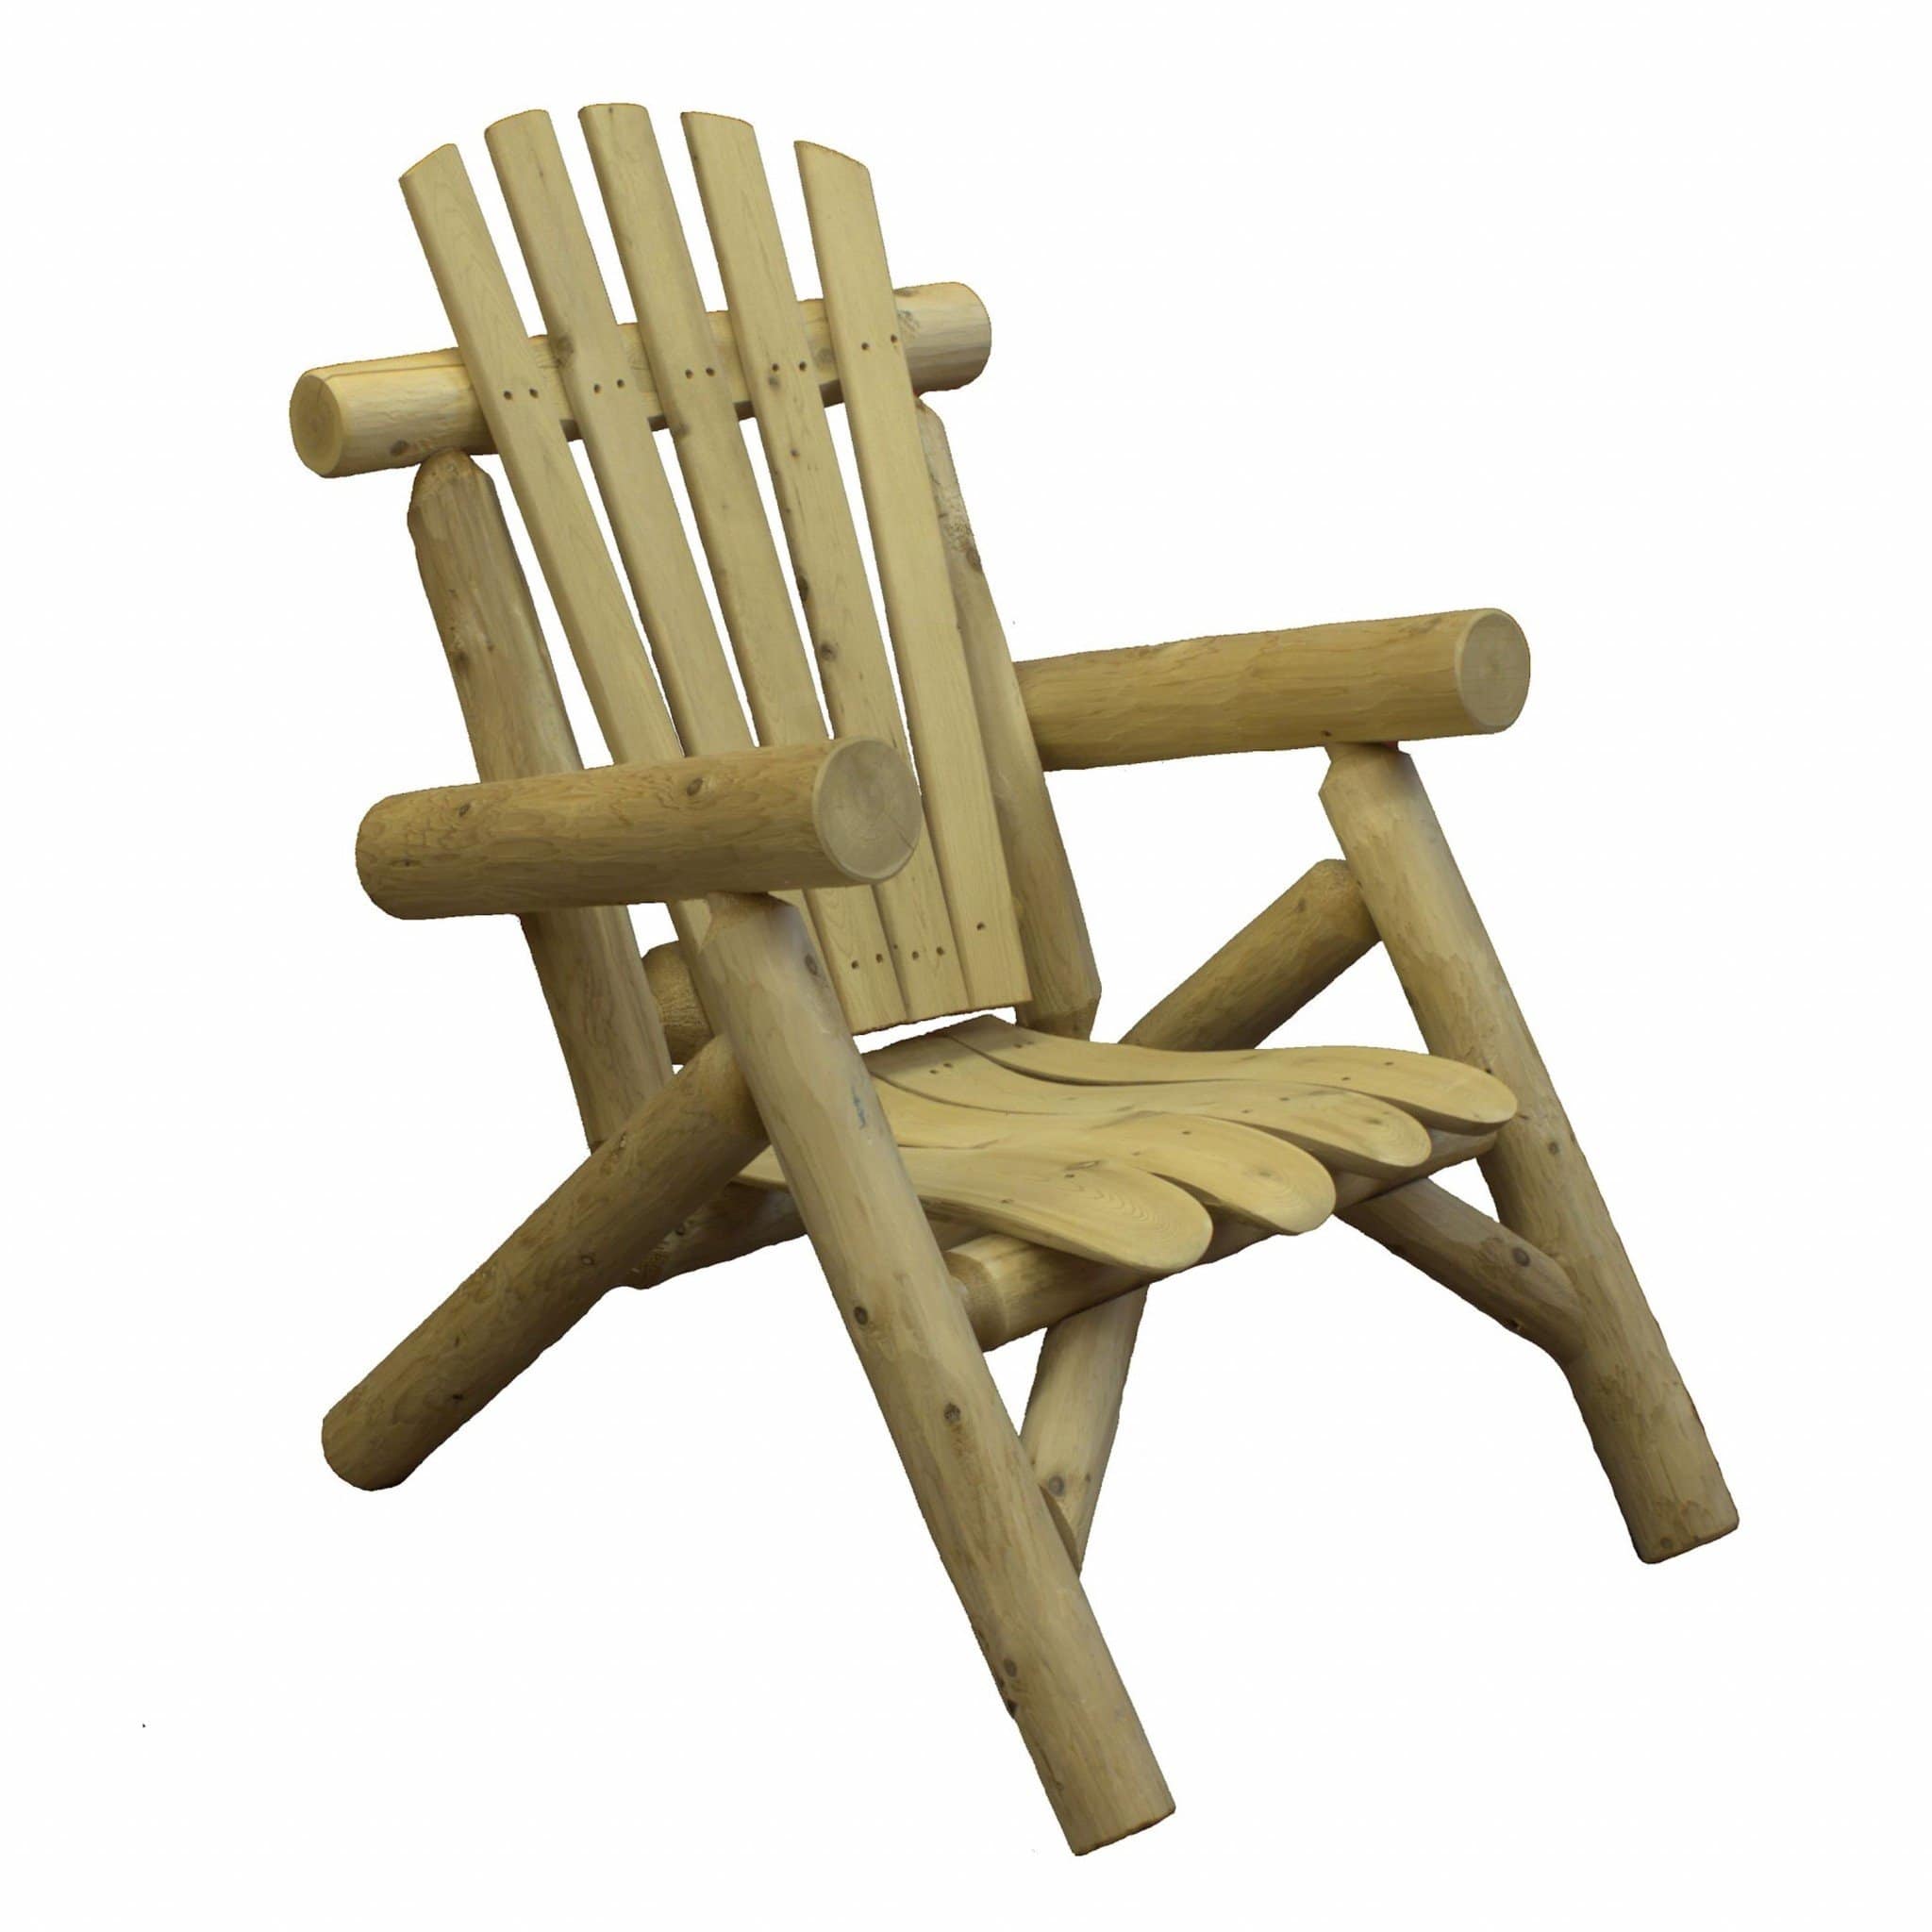 HomeRoots Outdoors Outdoor Chairs Natural / Wood 28" X 30" X 39"  Natural Wood Lounge Chair